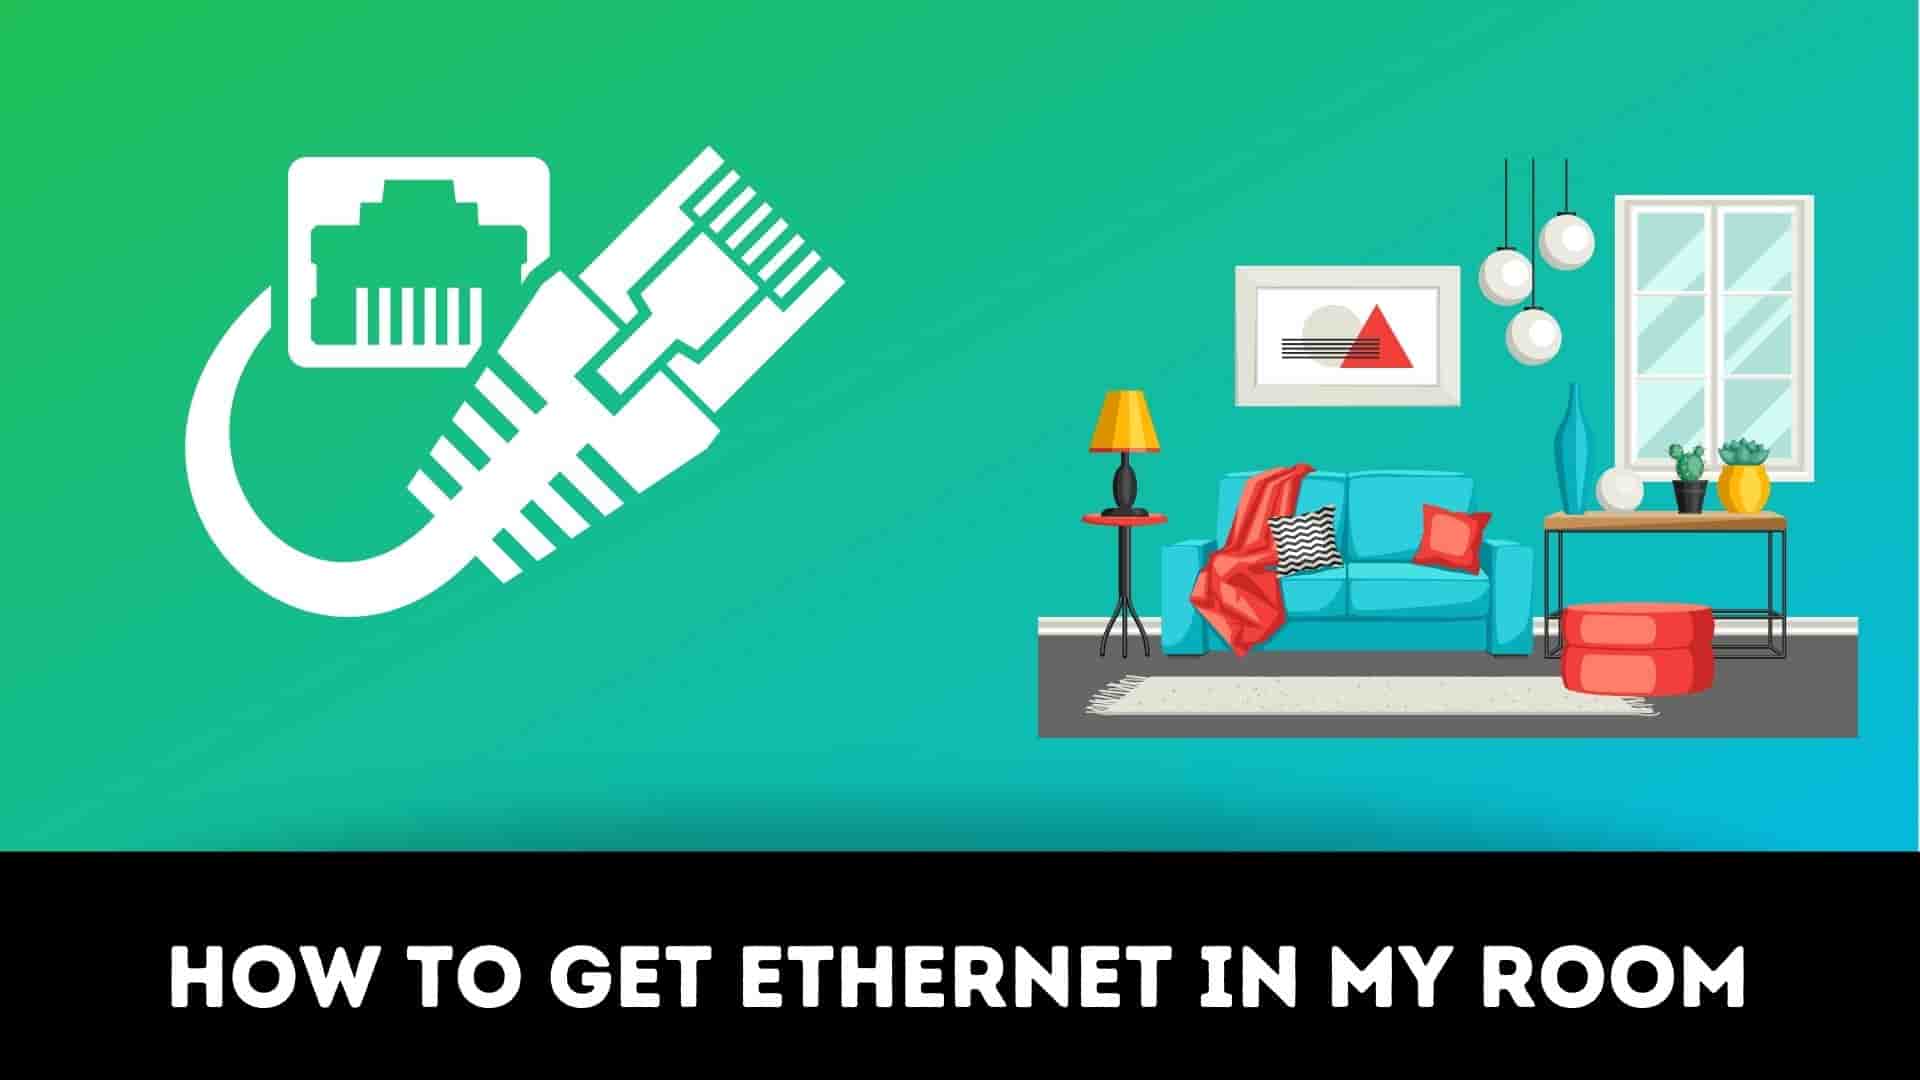 How to get ethernet in my room